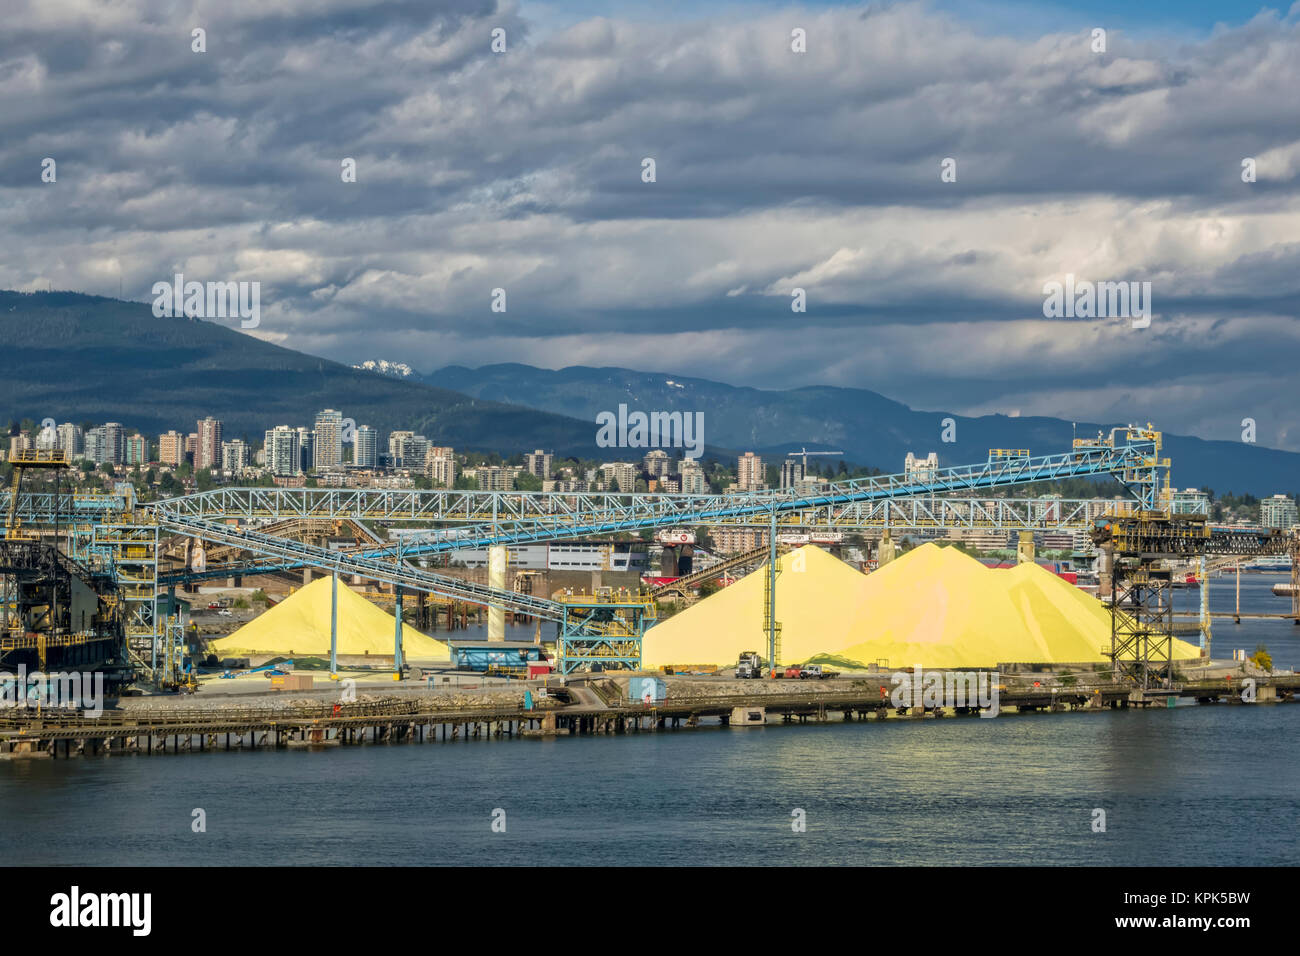 piles-of-sulphur-in-the-port-for-shipping-from-vancouver-vancouver-KPK5BW.jpg